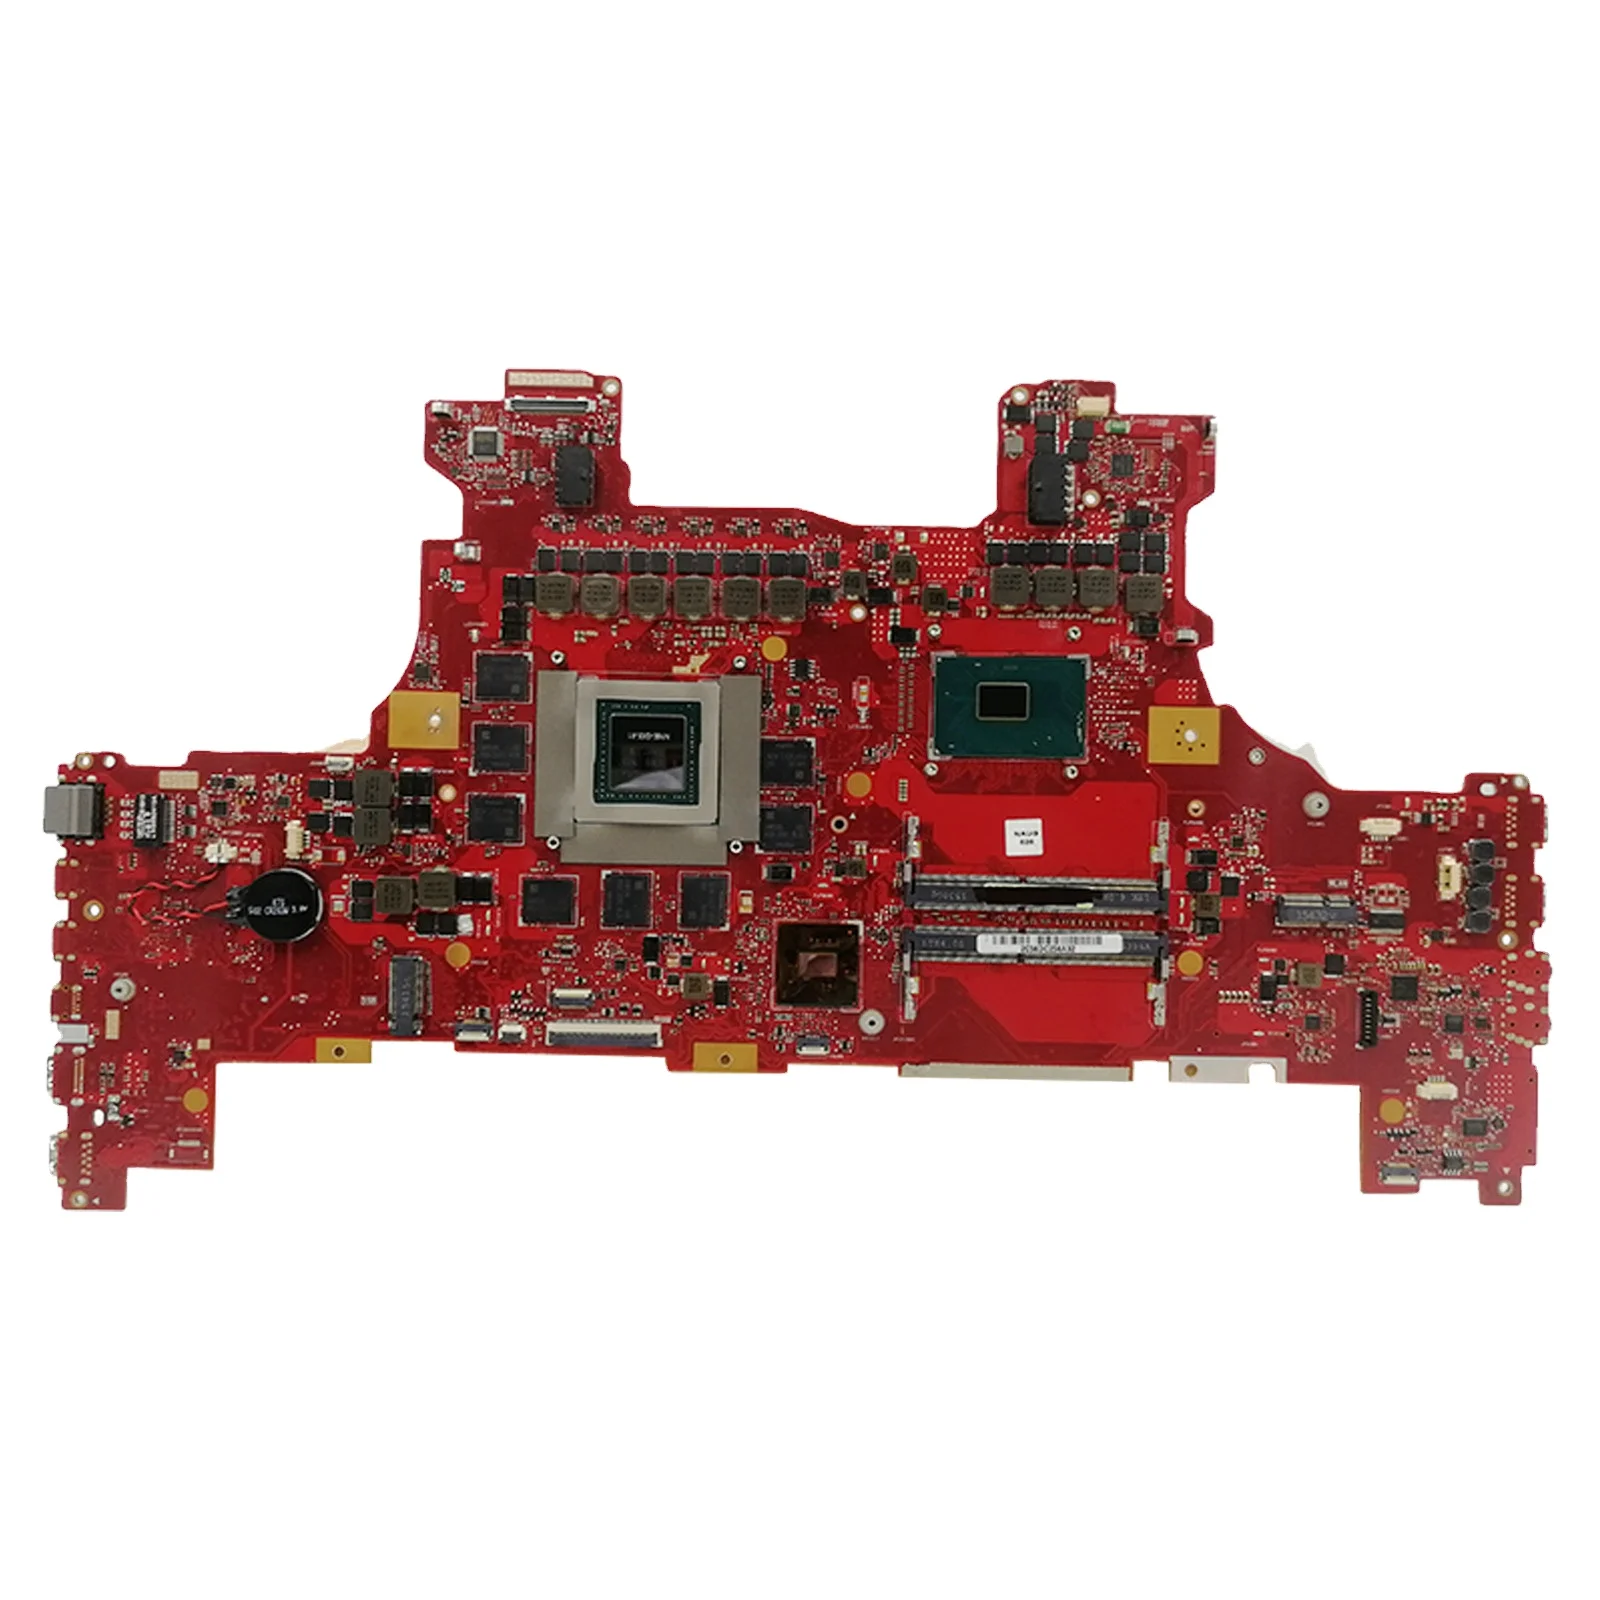 

Notebook Mainboard For ASUS ROG GX700 GX700VO GX700V Laptop Motherboard With I7-6820HK CPU GTX980M/8G 100% Test MAIN BOARD